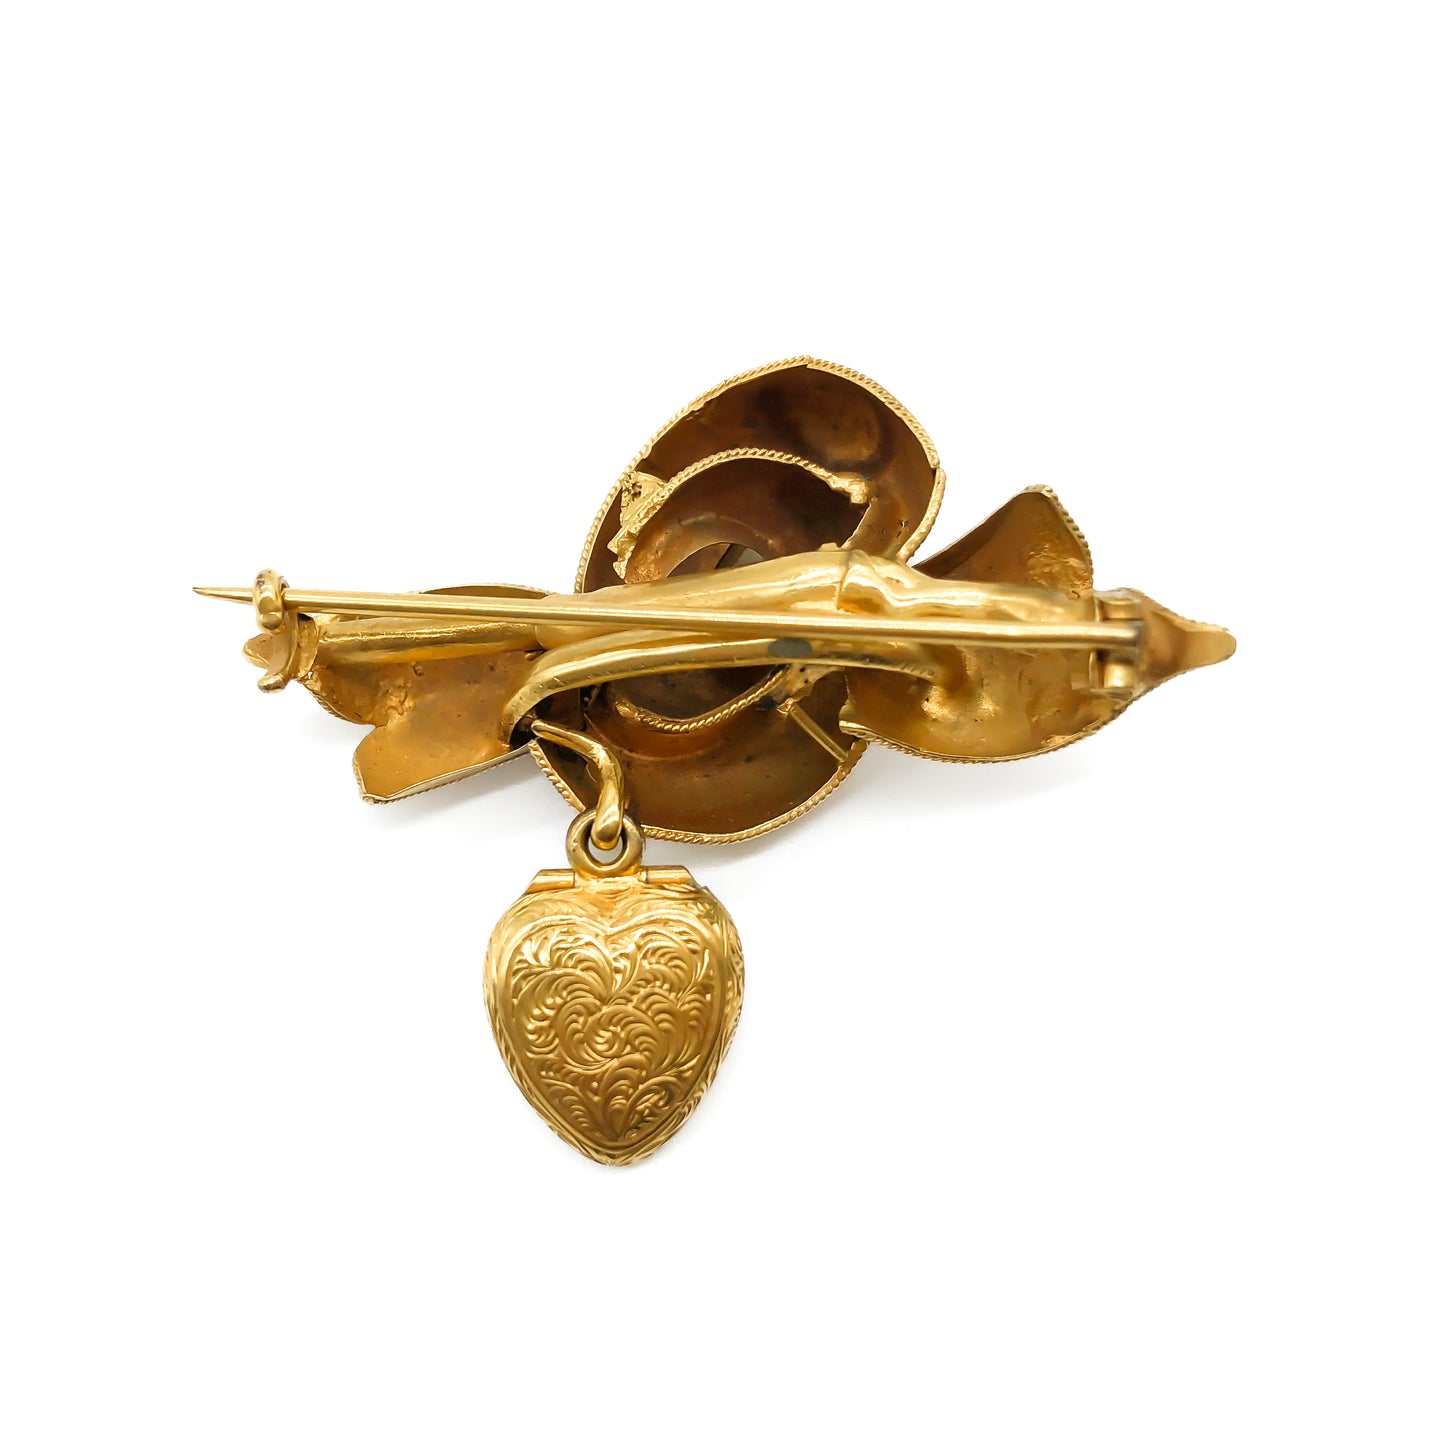 Very ornate 15ct yellow gold early Victorian brooch with a heart shaped drop.